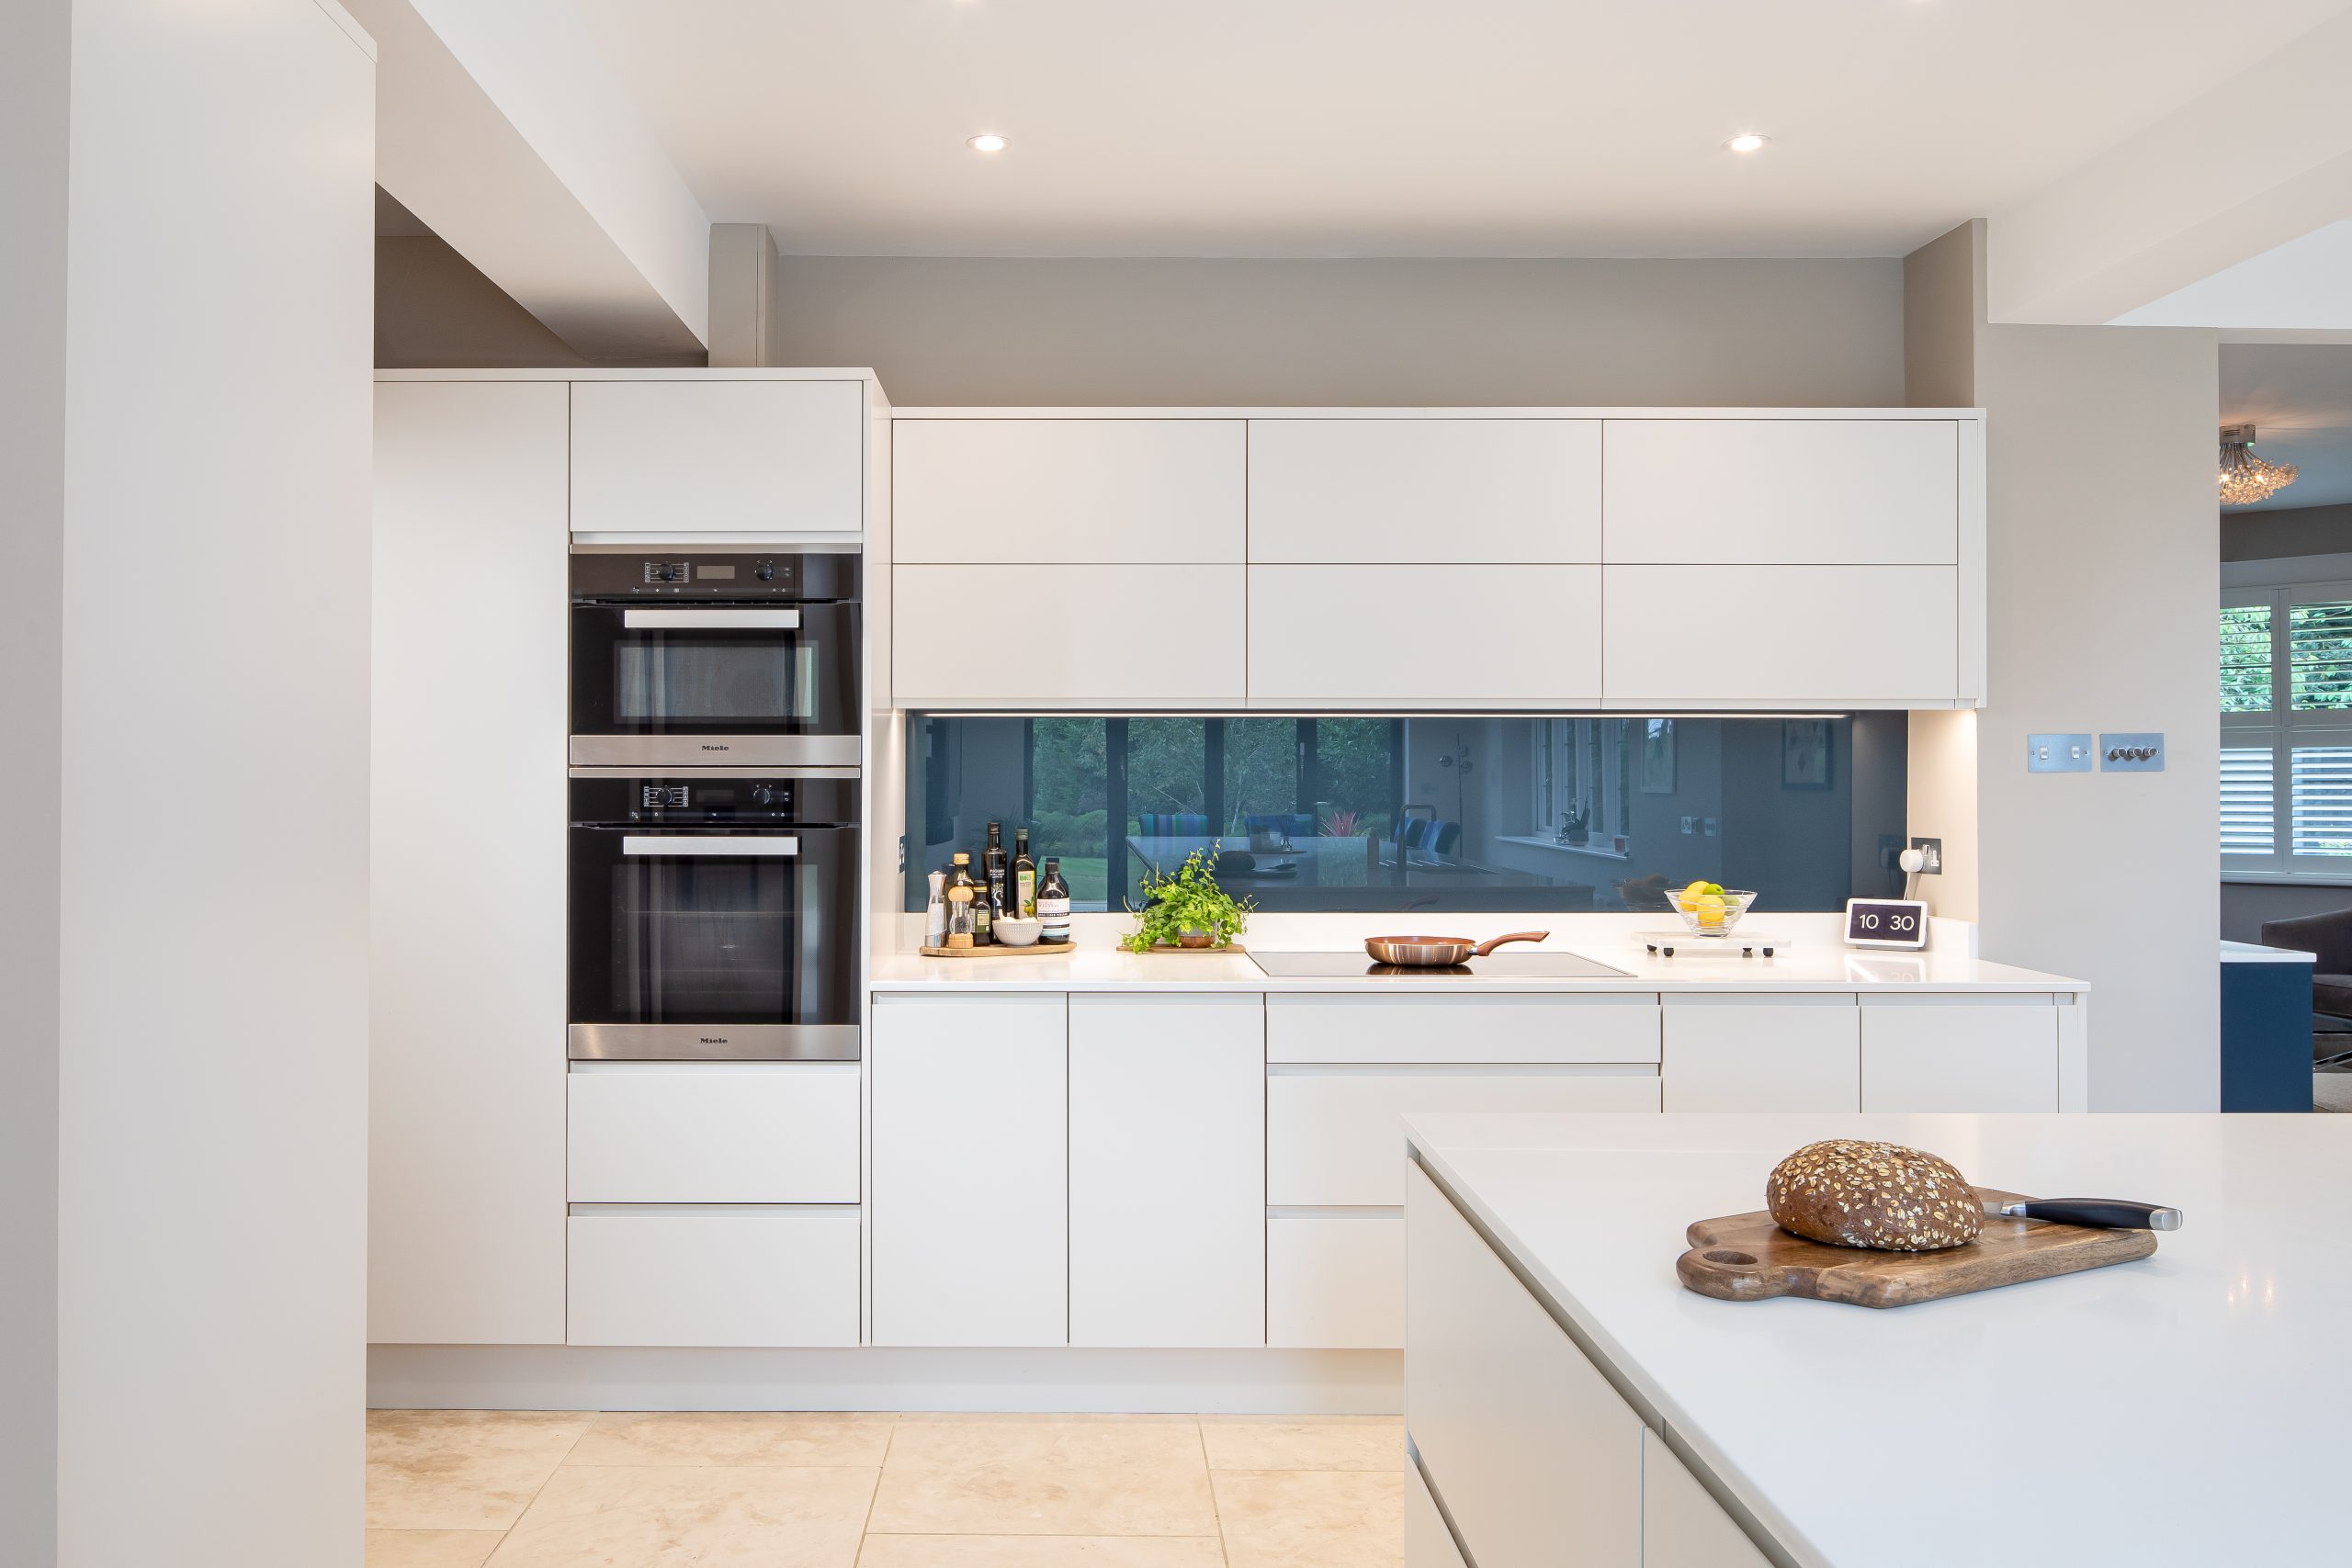 John Lewis of Hungerford pure kitchen in white and black splashback